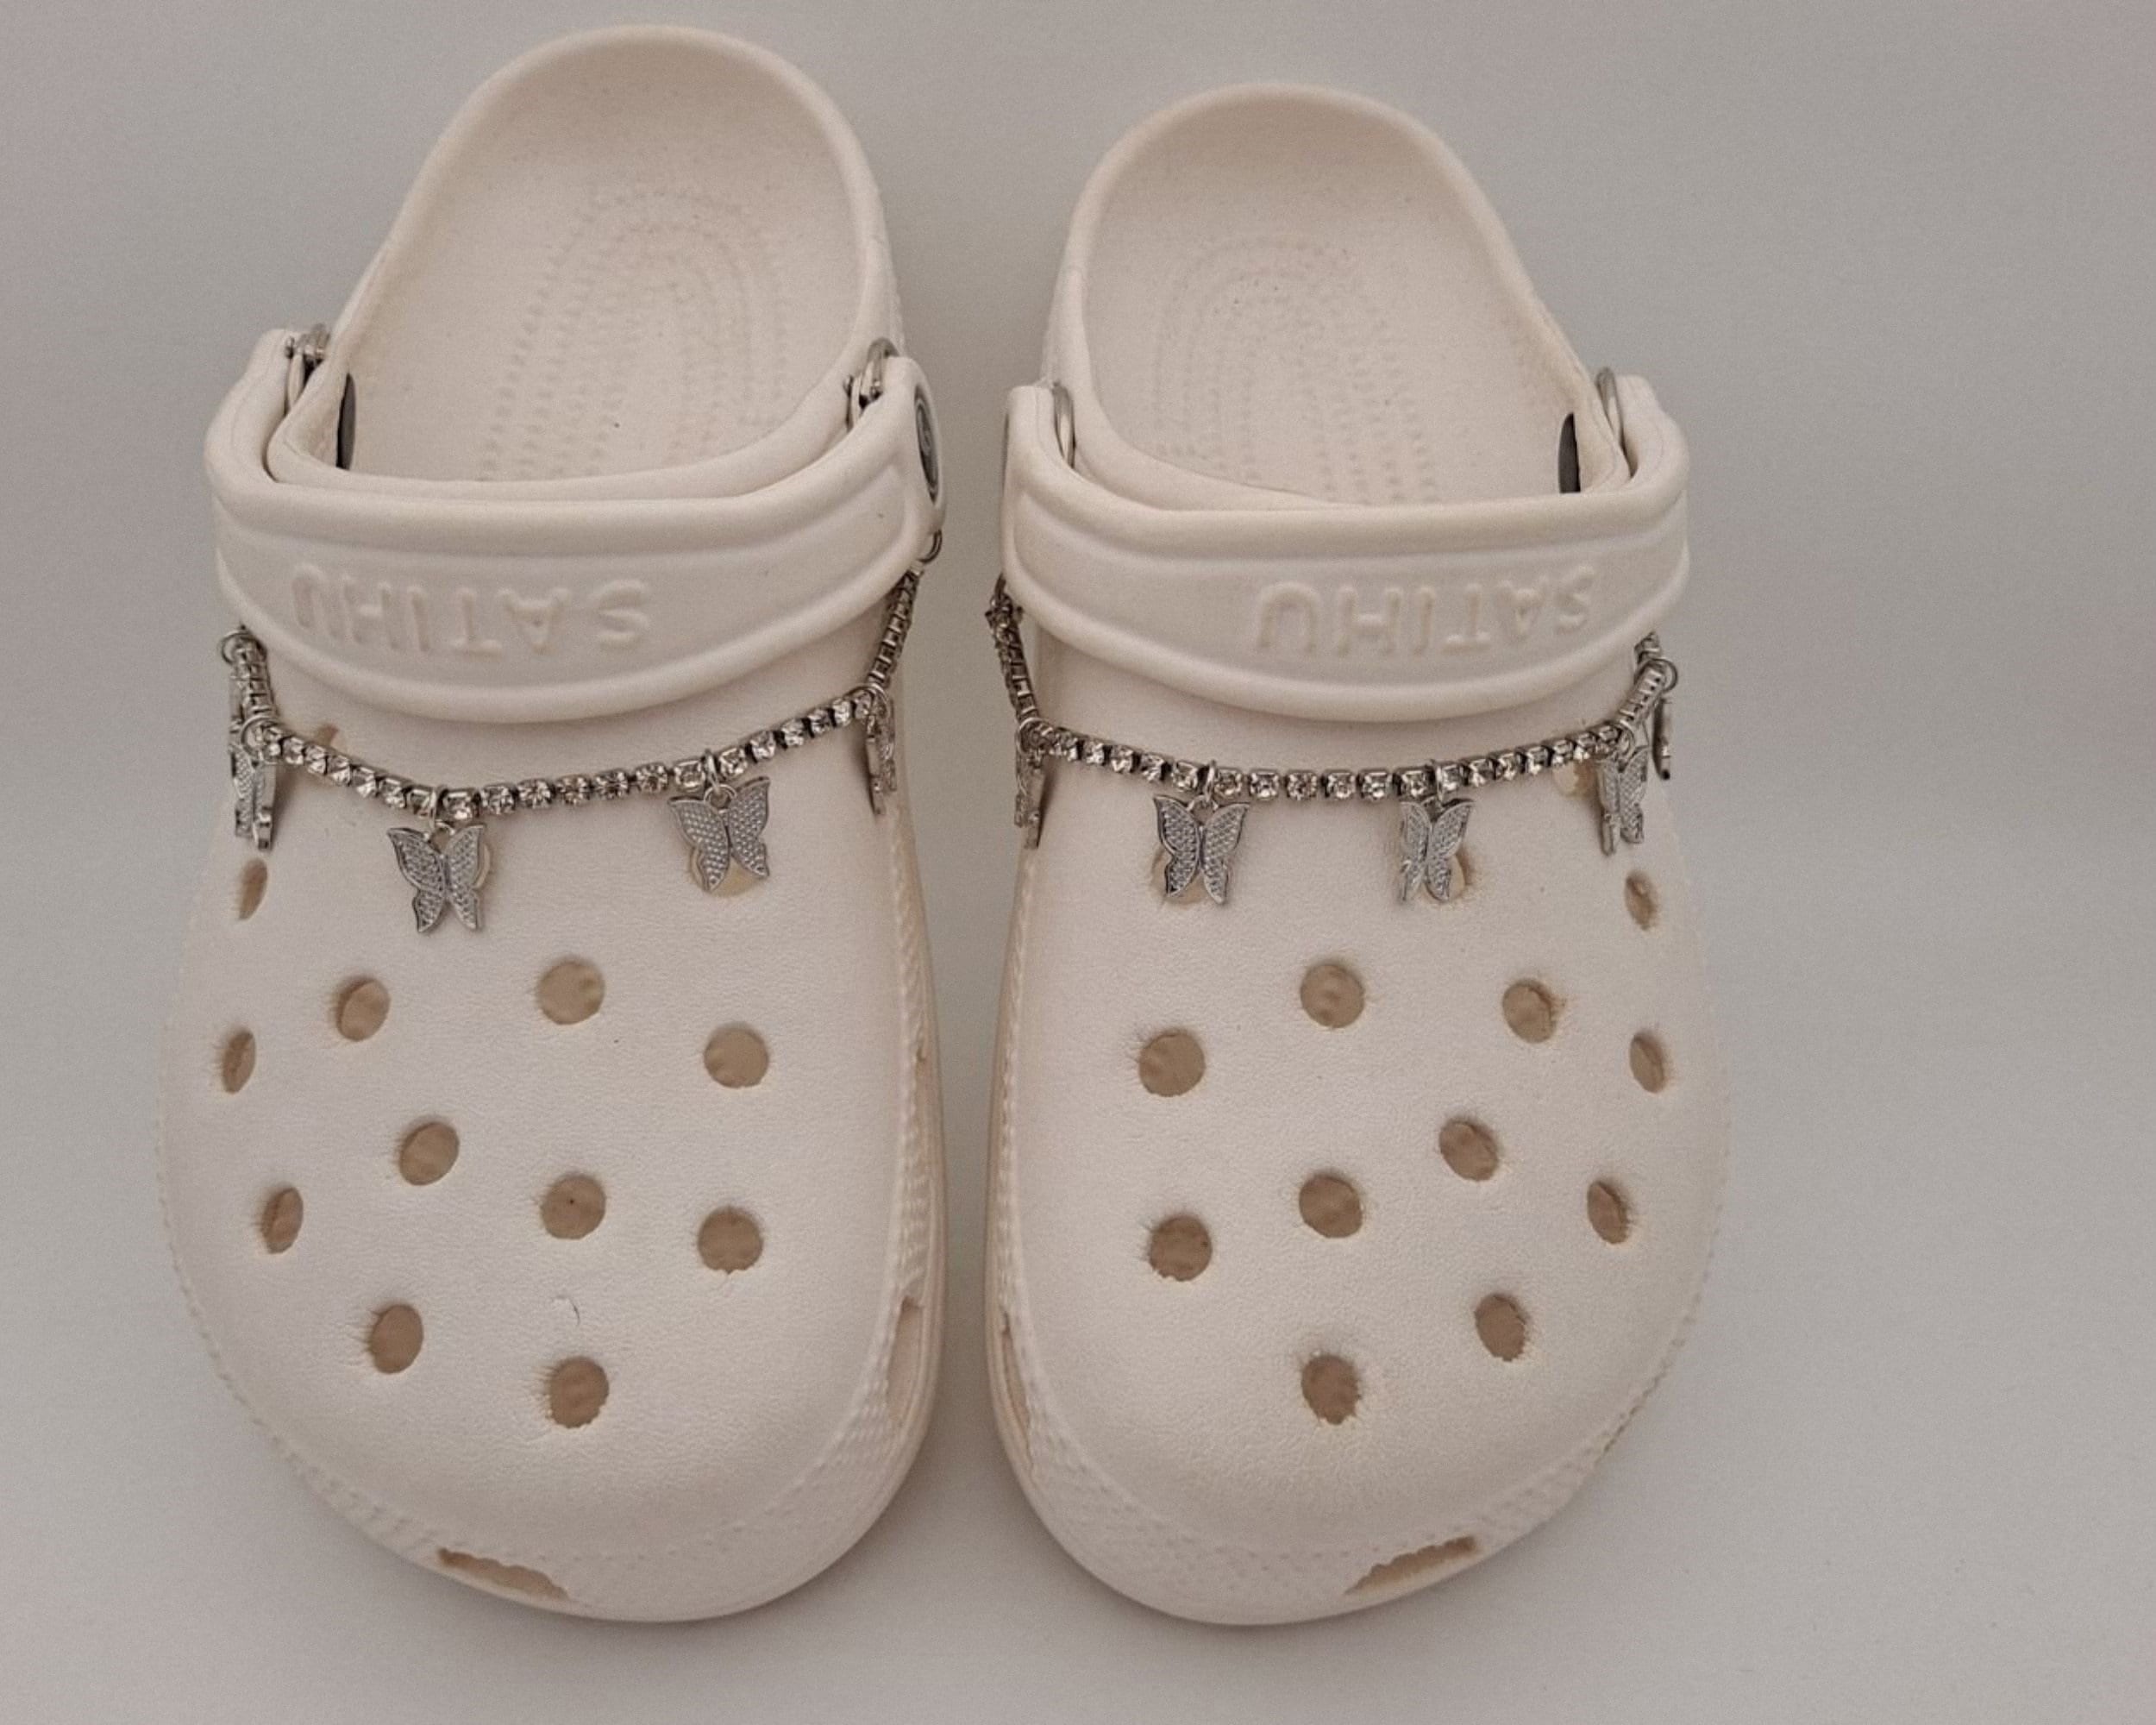 chanel inspired jibbitz for crocs Cheap Sell - OFF 75%